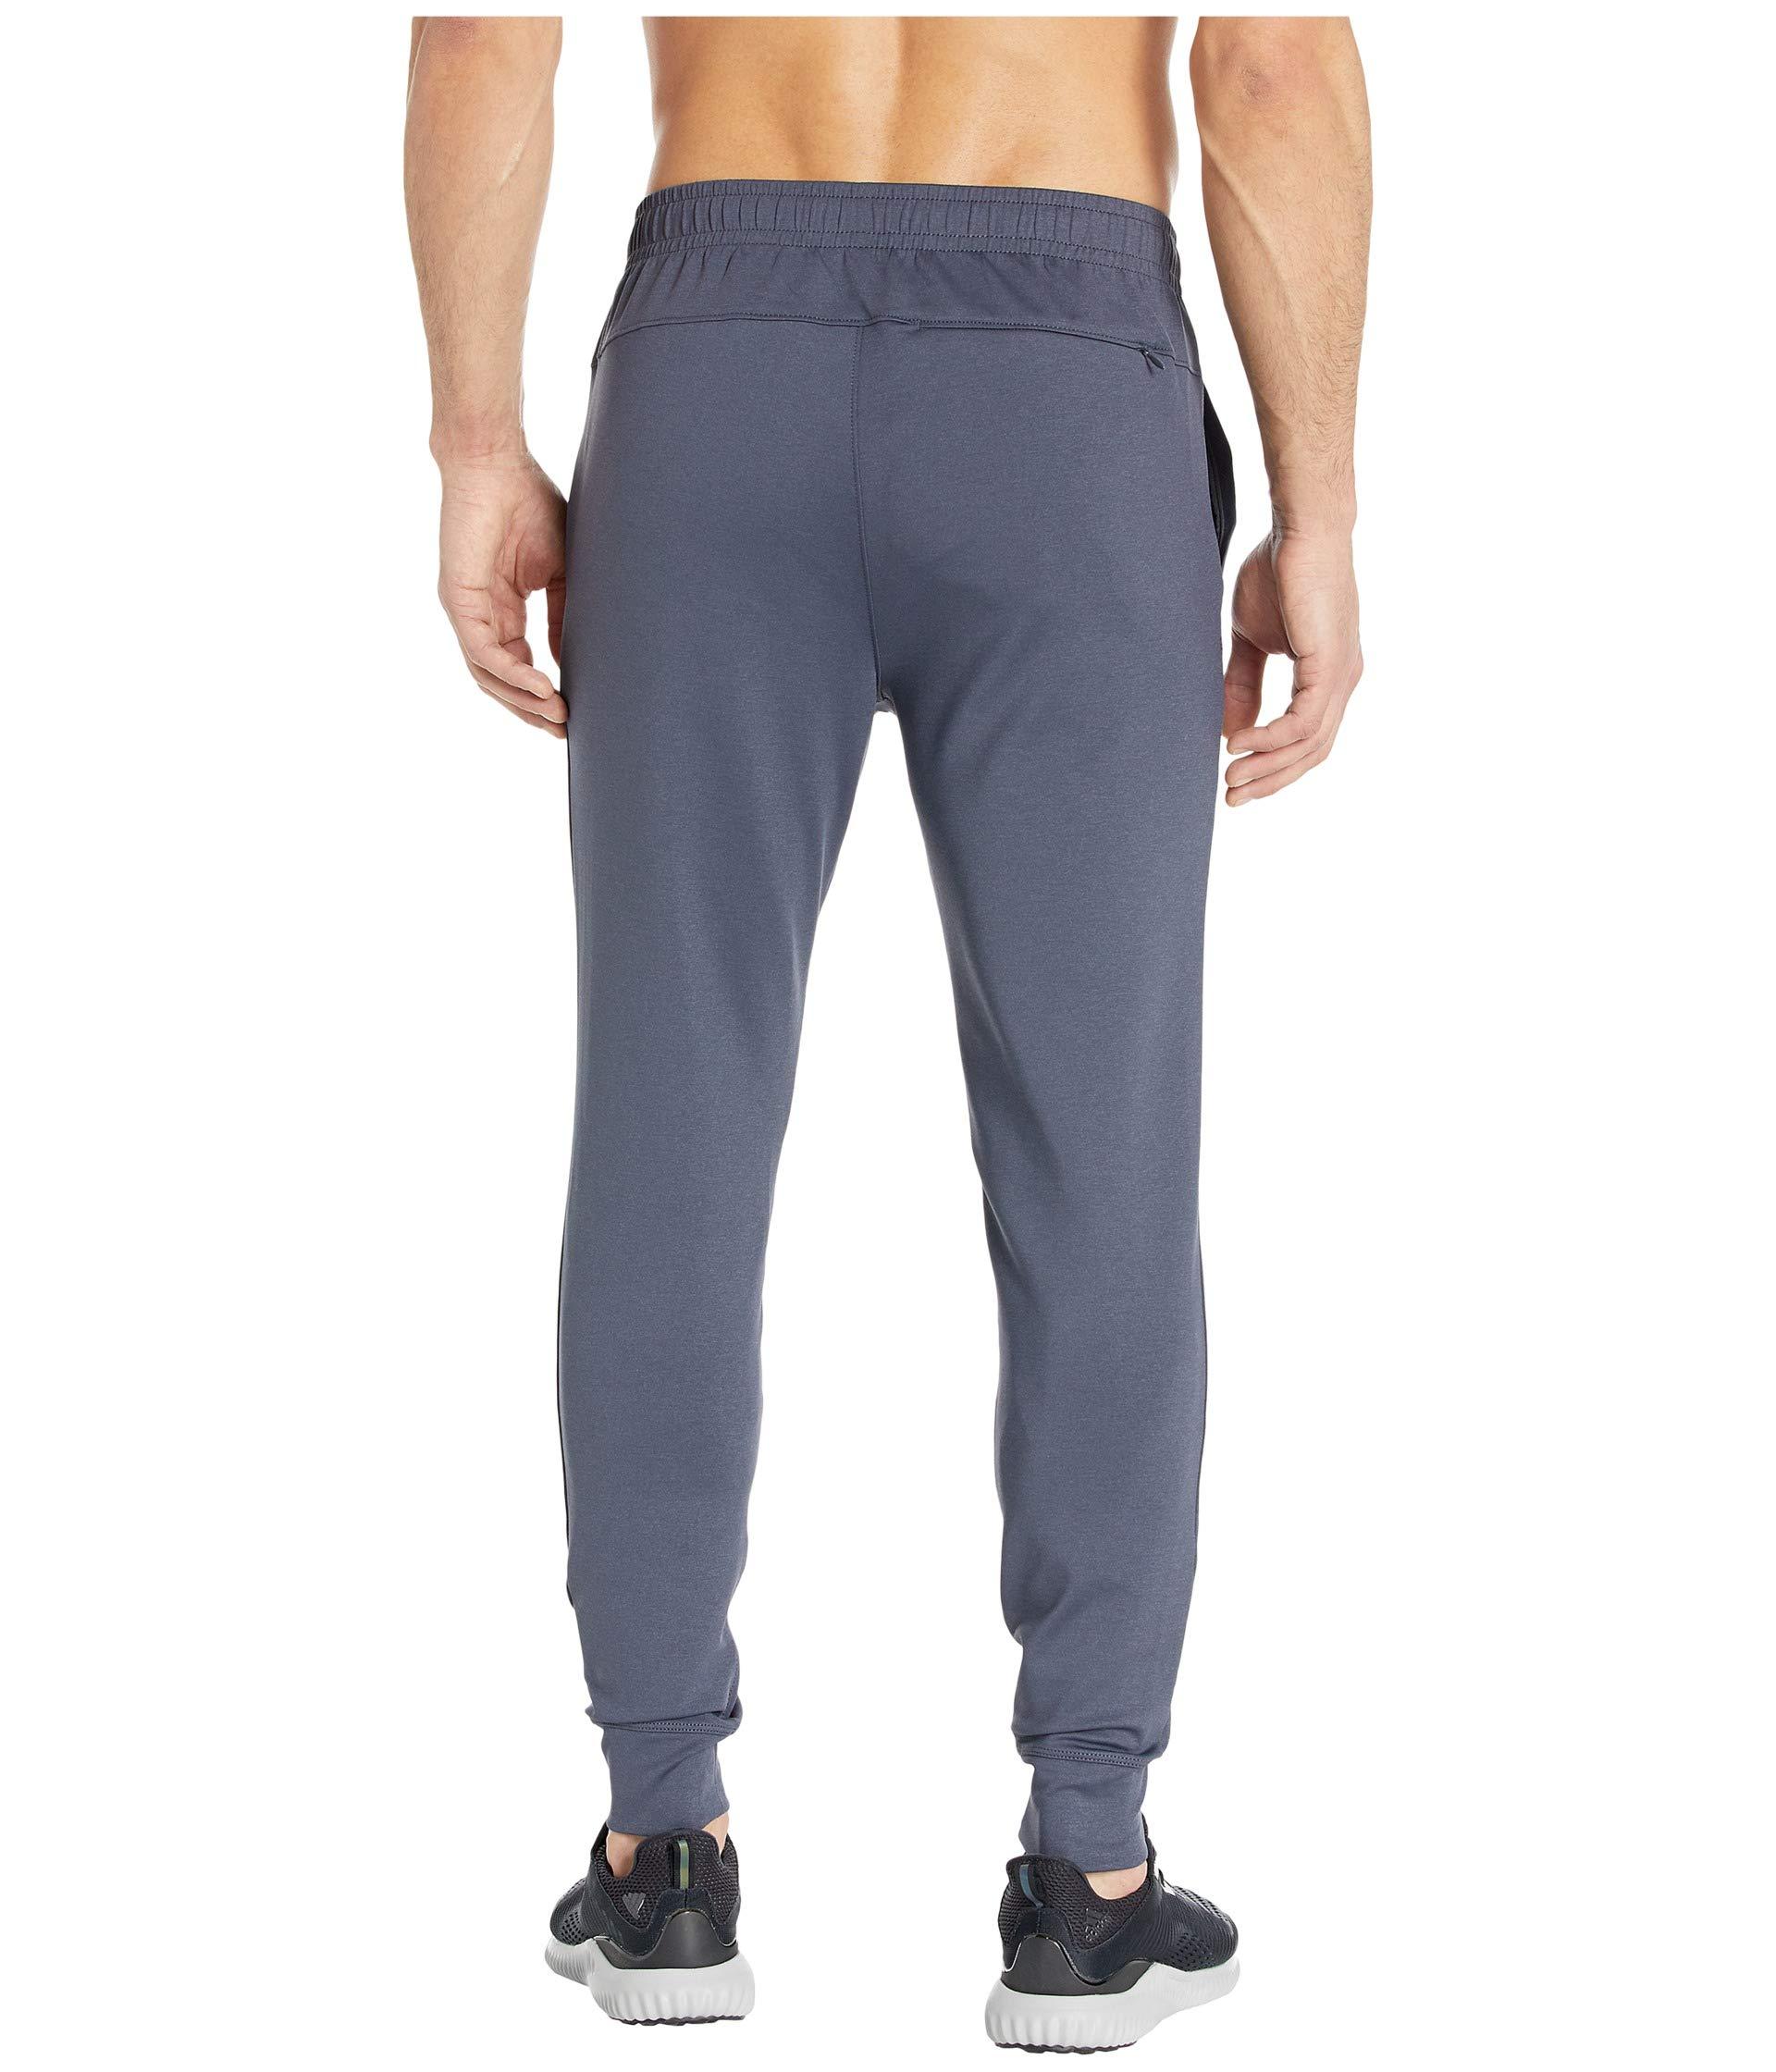 Rhone Synthetic Spar Tactel Joggers in Gray for Men - Lyst